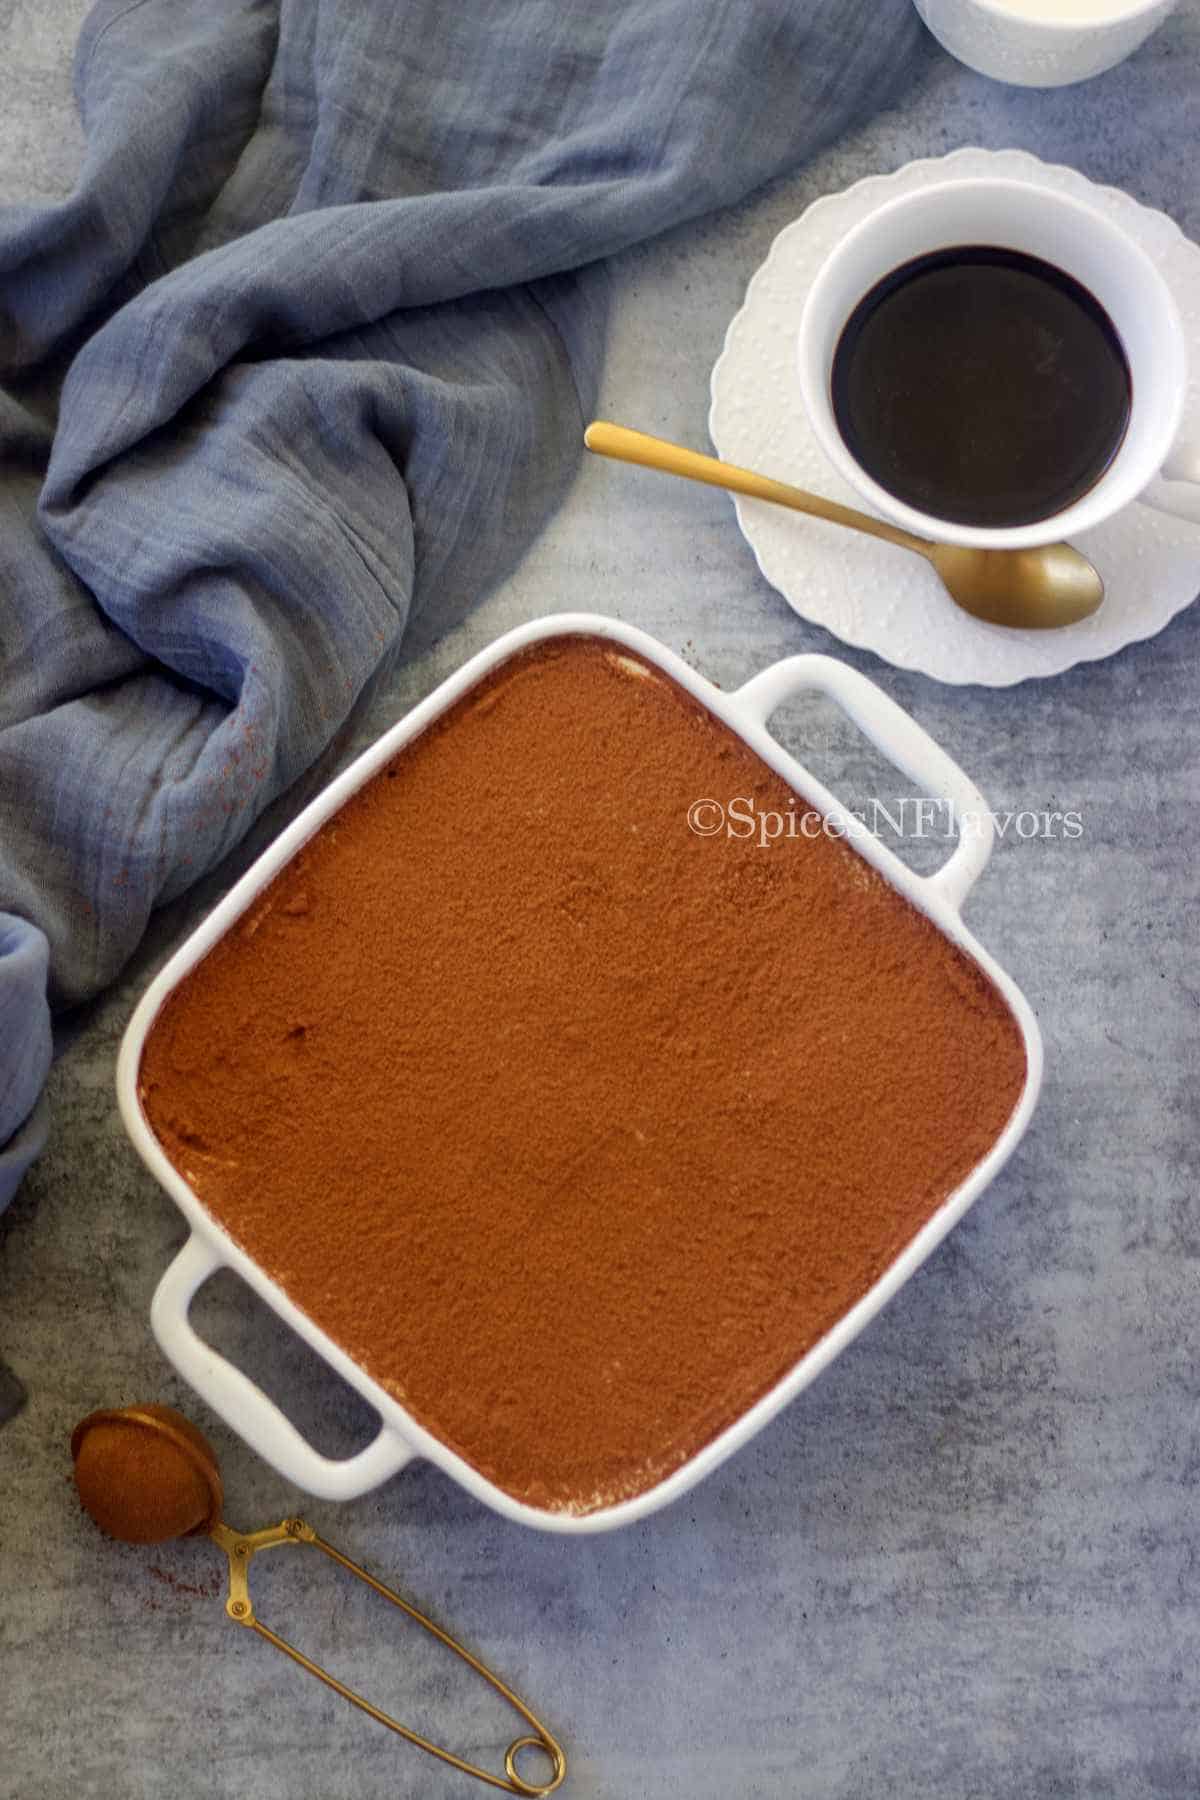 assembled tiramisu in a white baking dish dusted with cocoa powder served with black coffee on the side